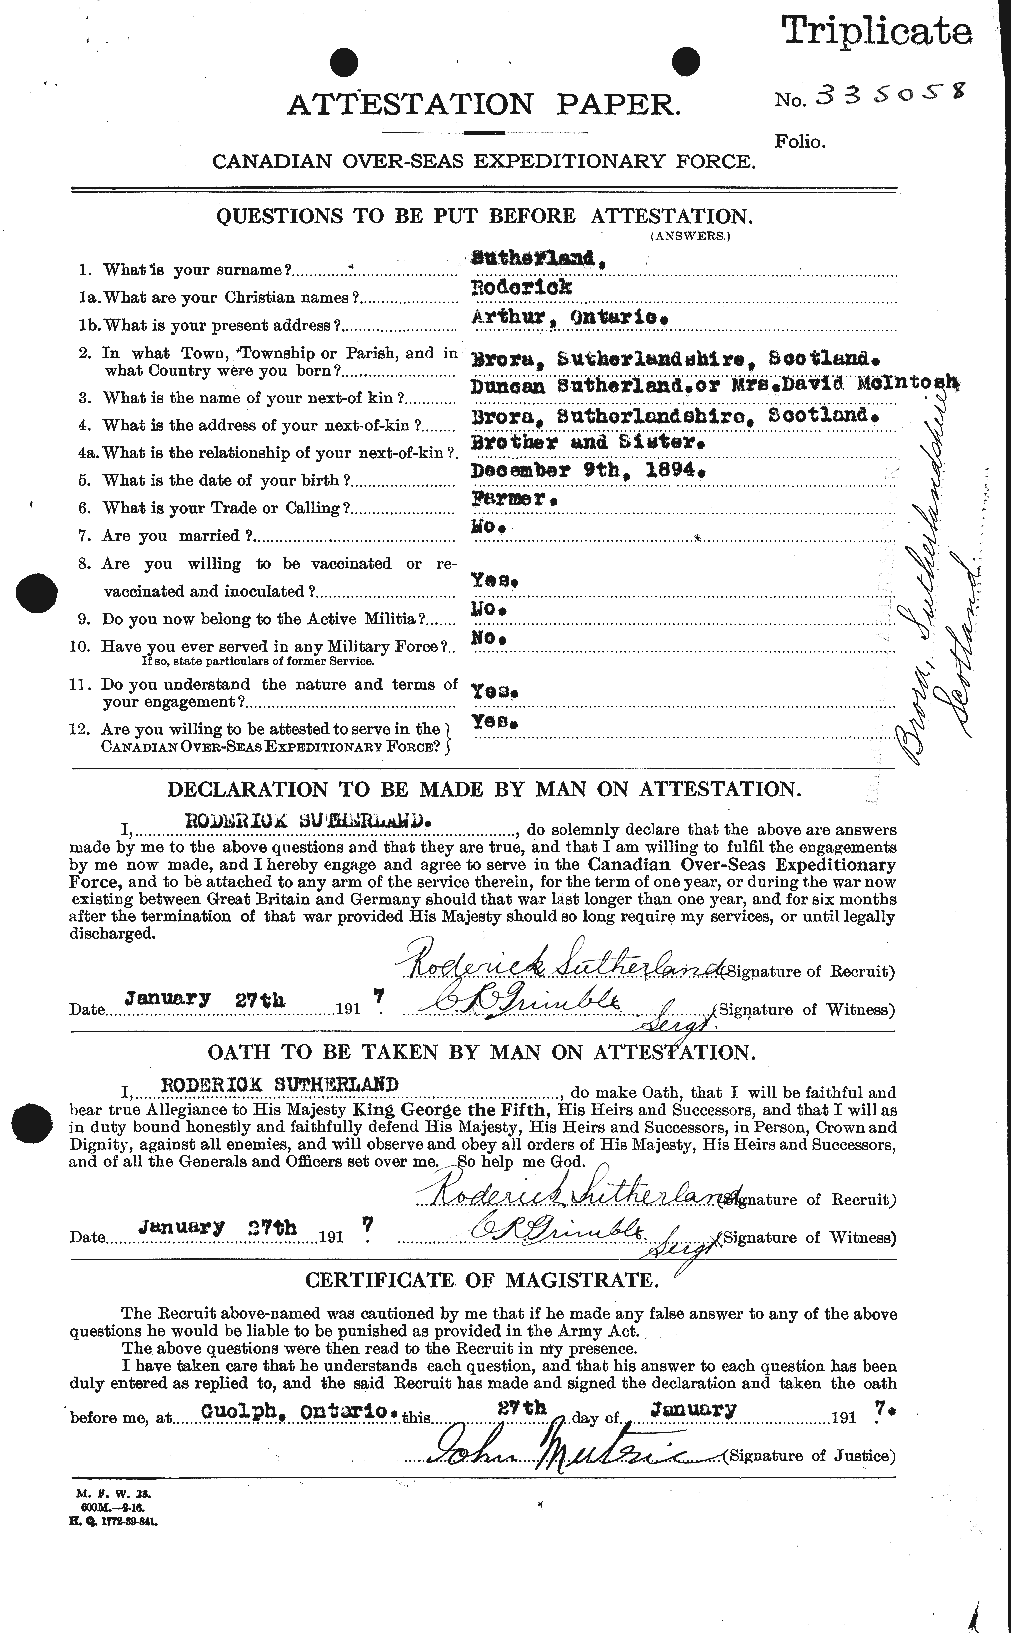 Personnel Records of the First World War - CEF 126568a